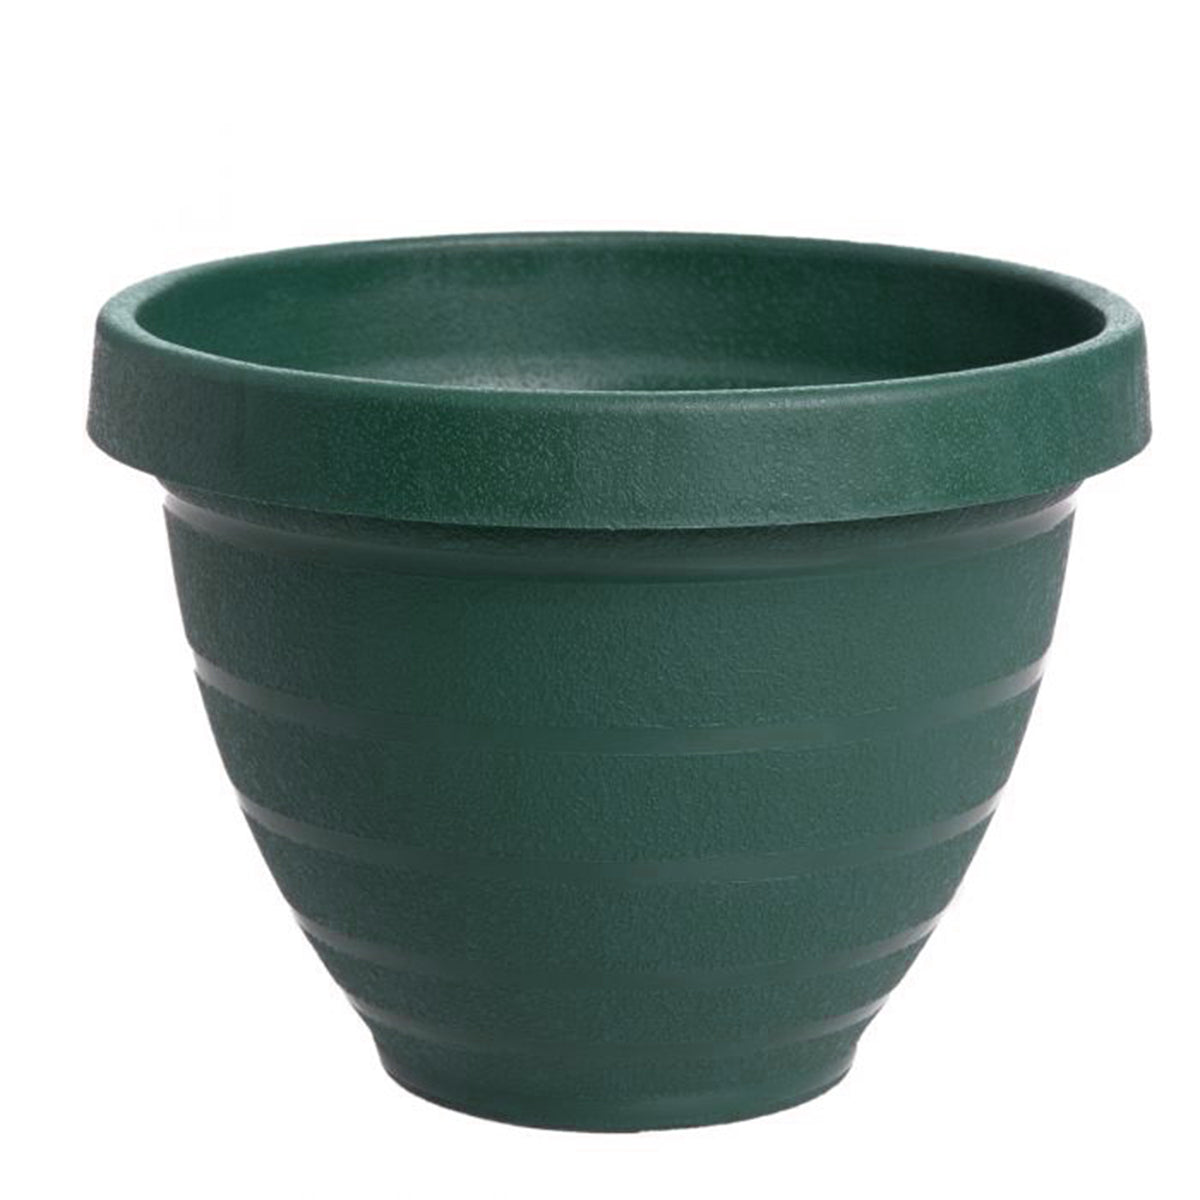 10pk Self-Watering Easy Care 6” Planter Pots By HC Companies